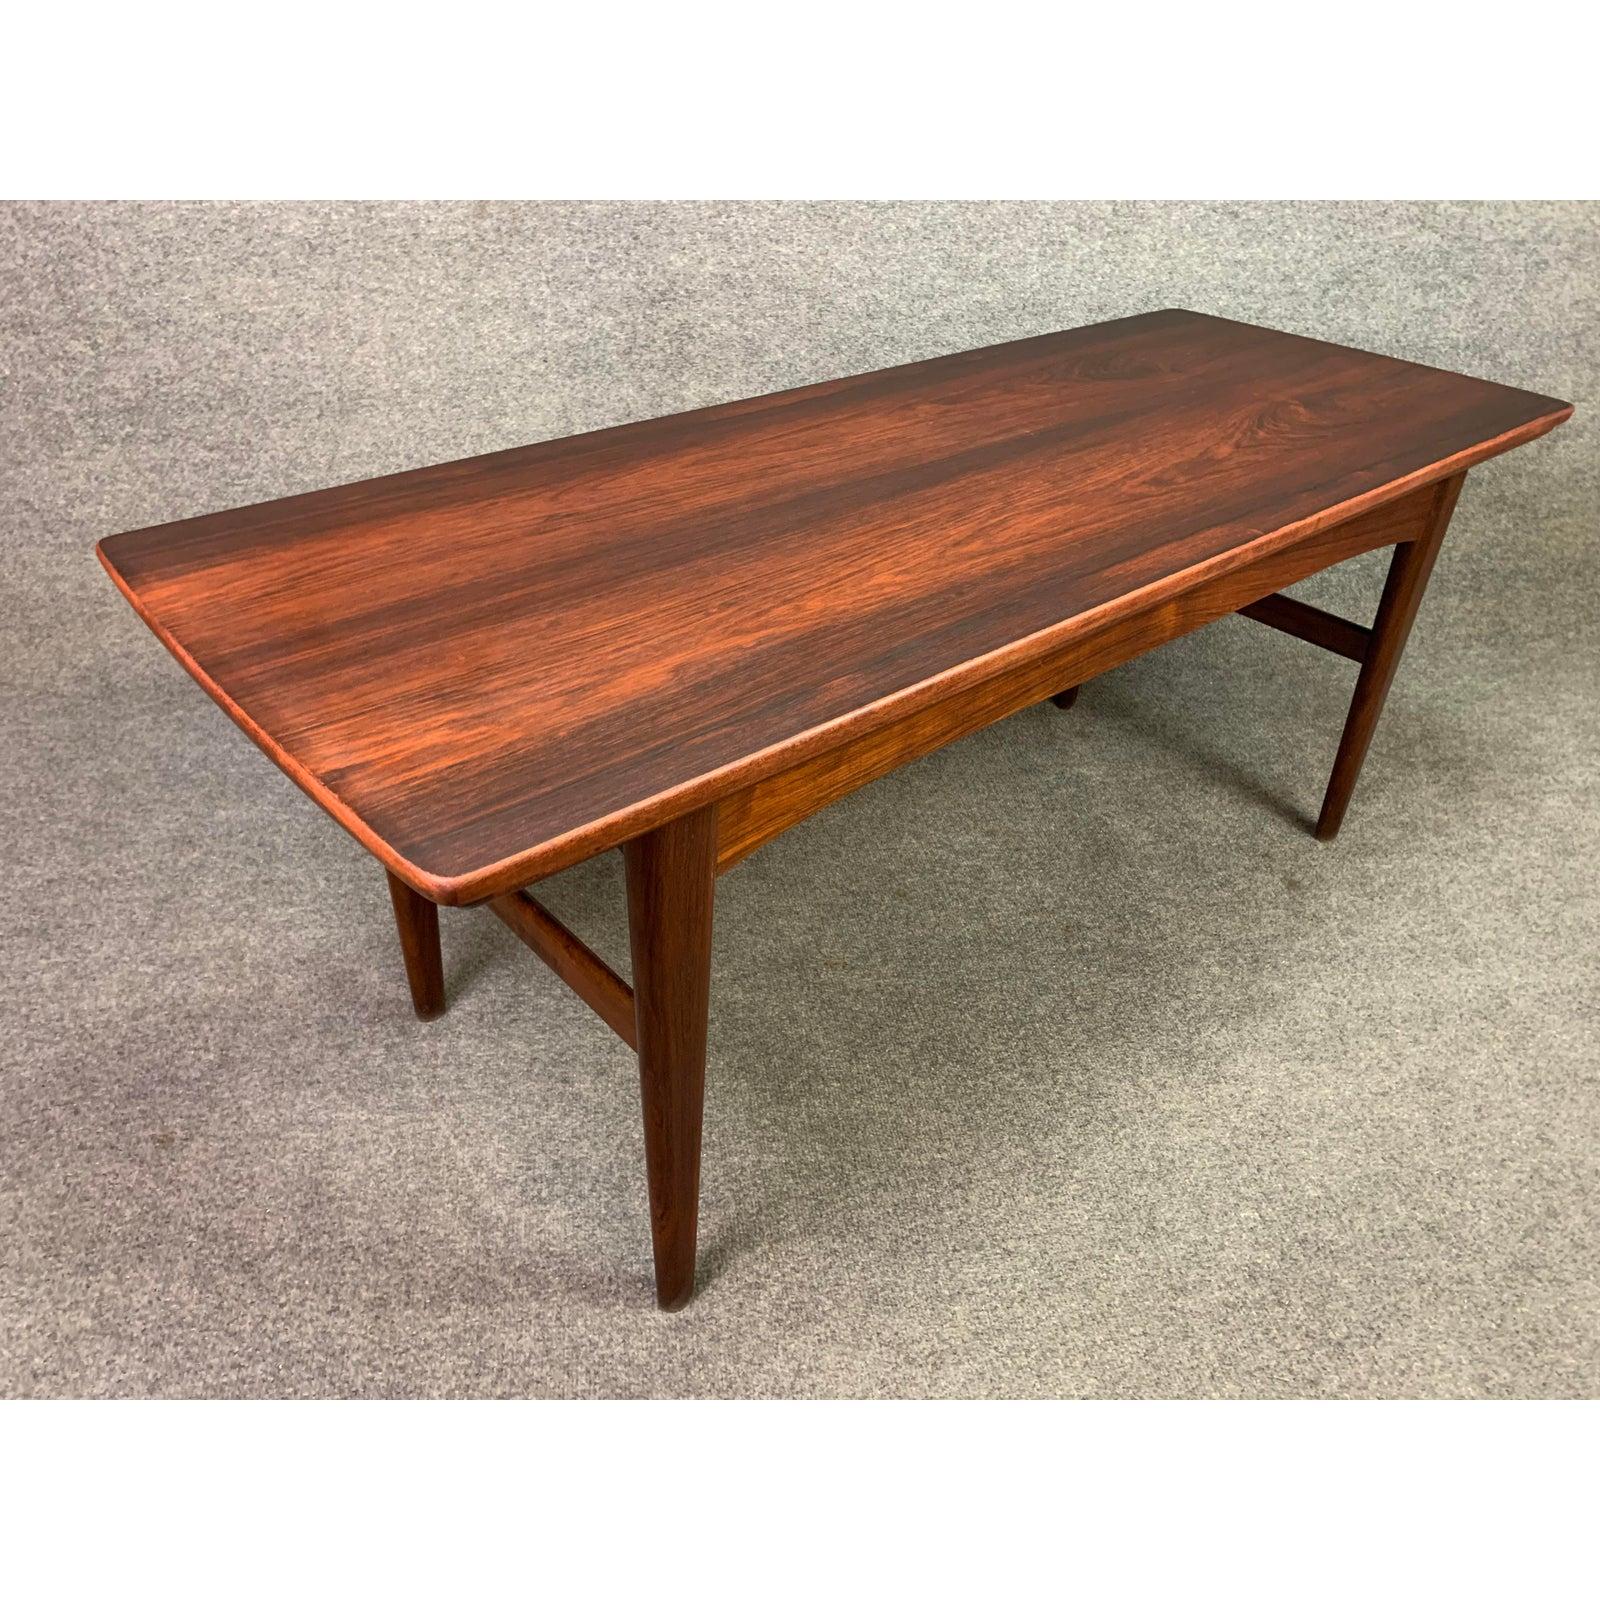 RESERVED FOR NOA: Vintage Danish Mid-Century Modern Rosewood Elevator Table 5